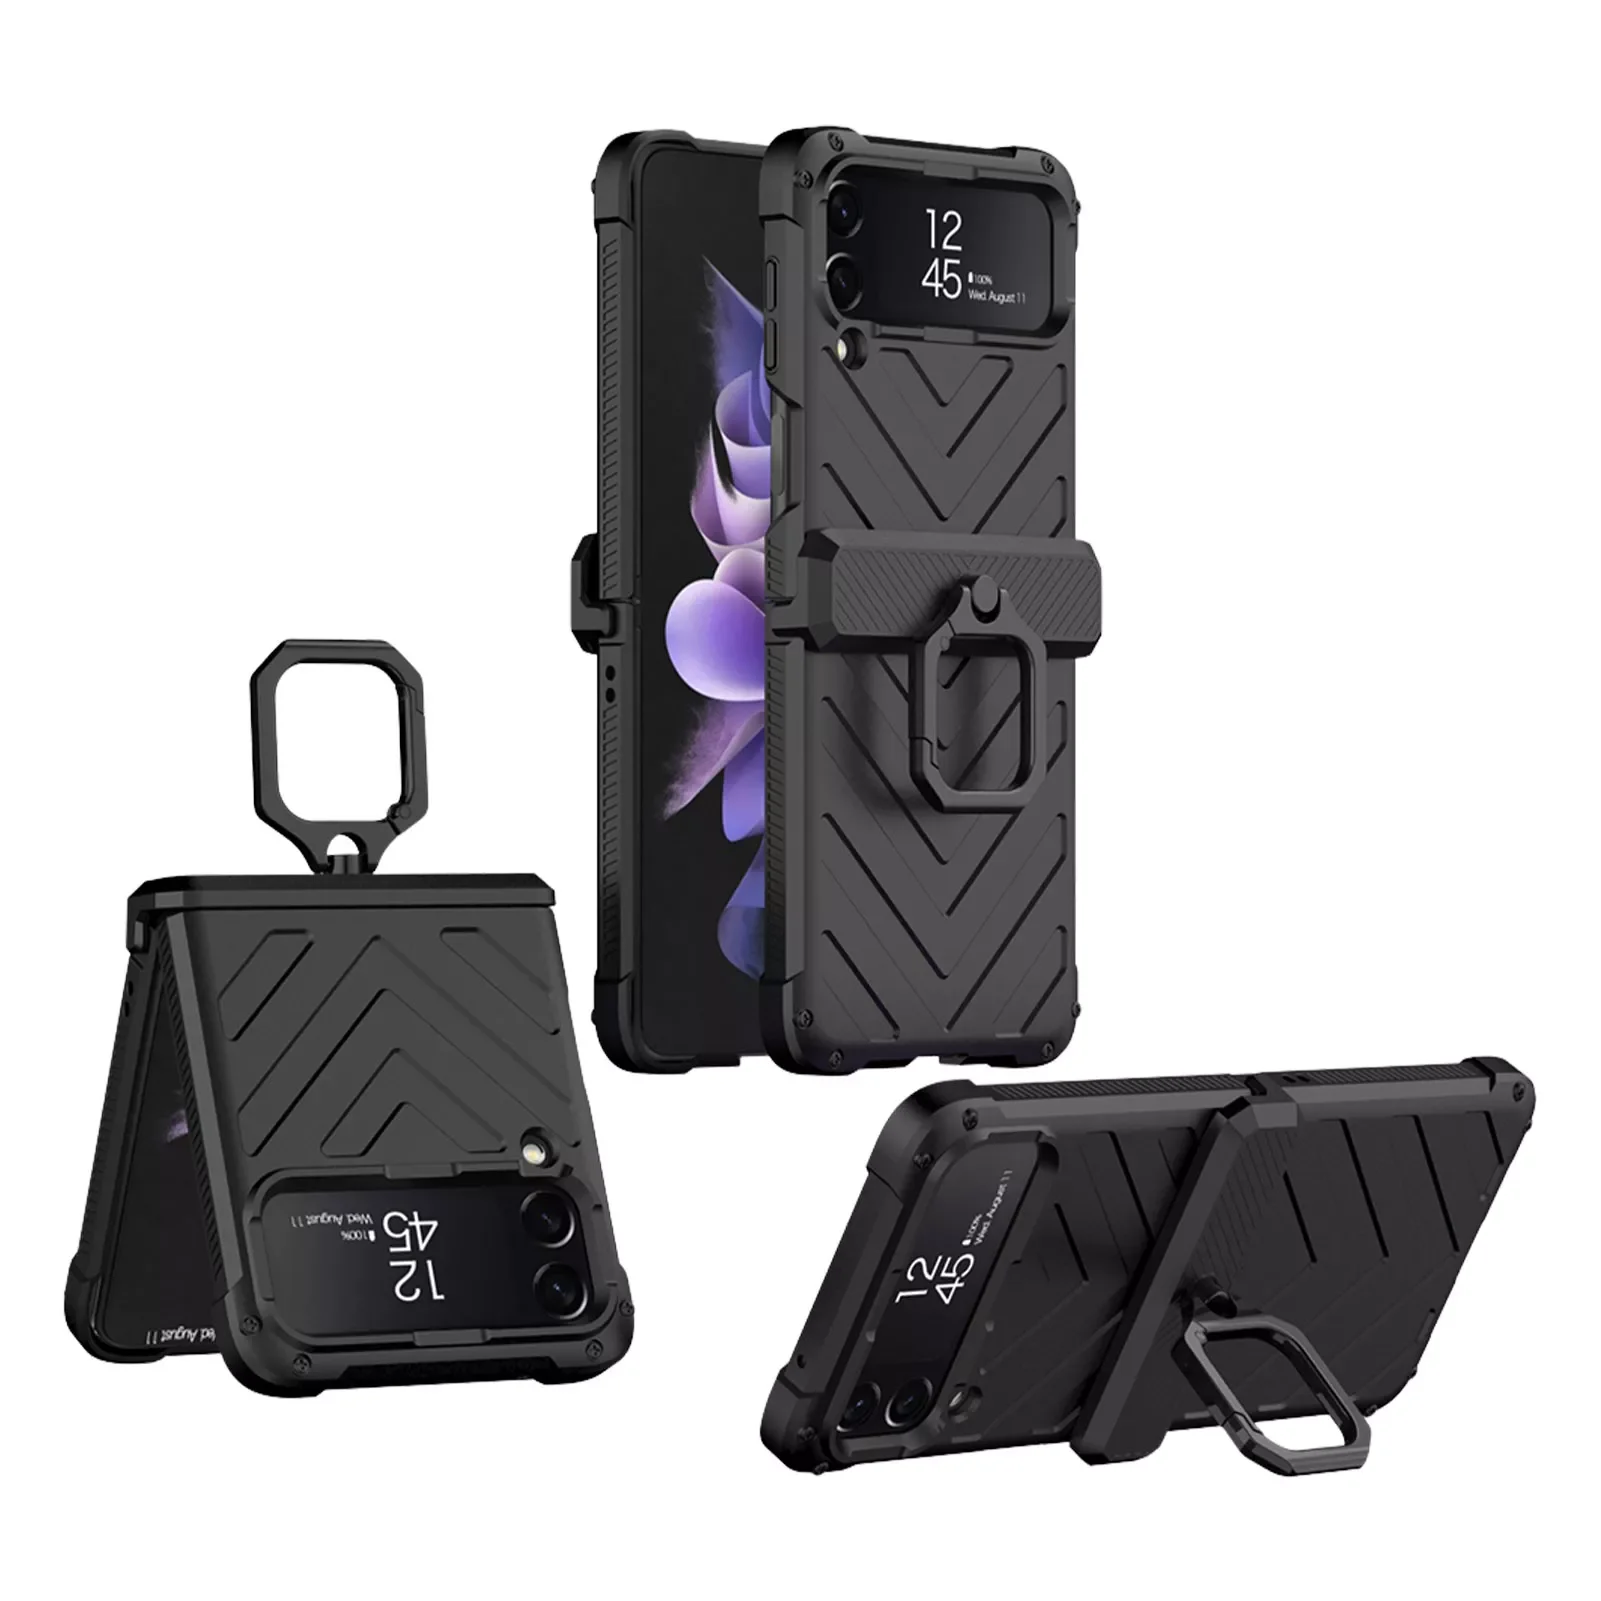 Protective TPU Case  Galaxy Flip 3 Shockproof Hinge Full Protection Phone Shell Cover  Galaxy Z Flip3